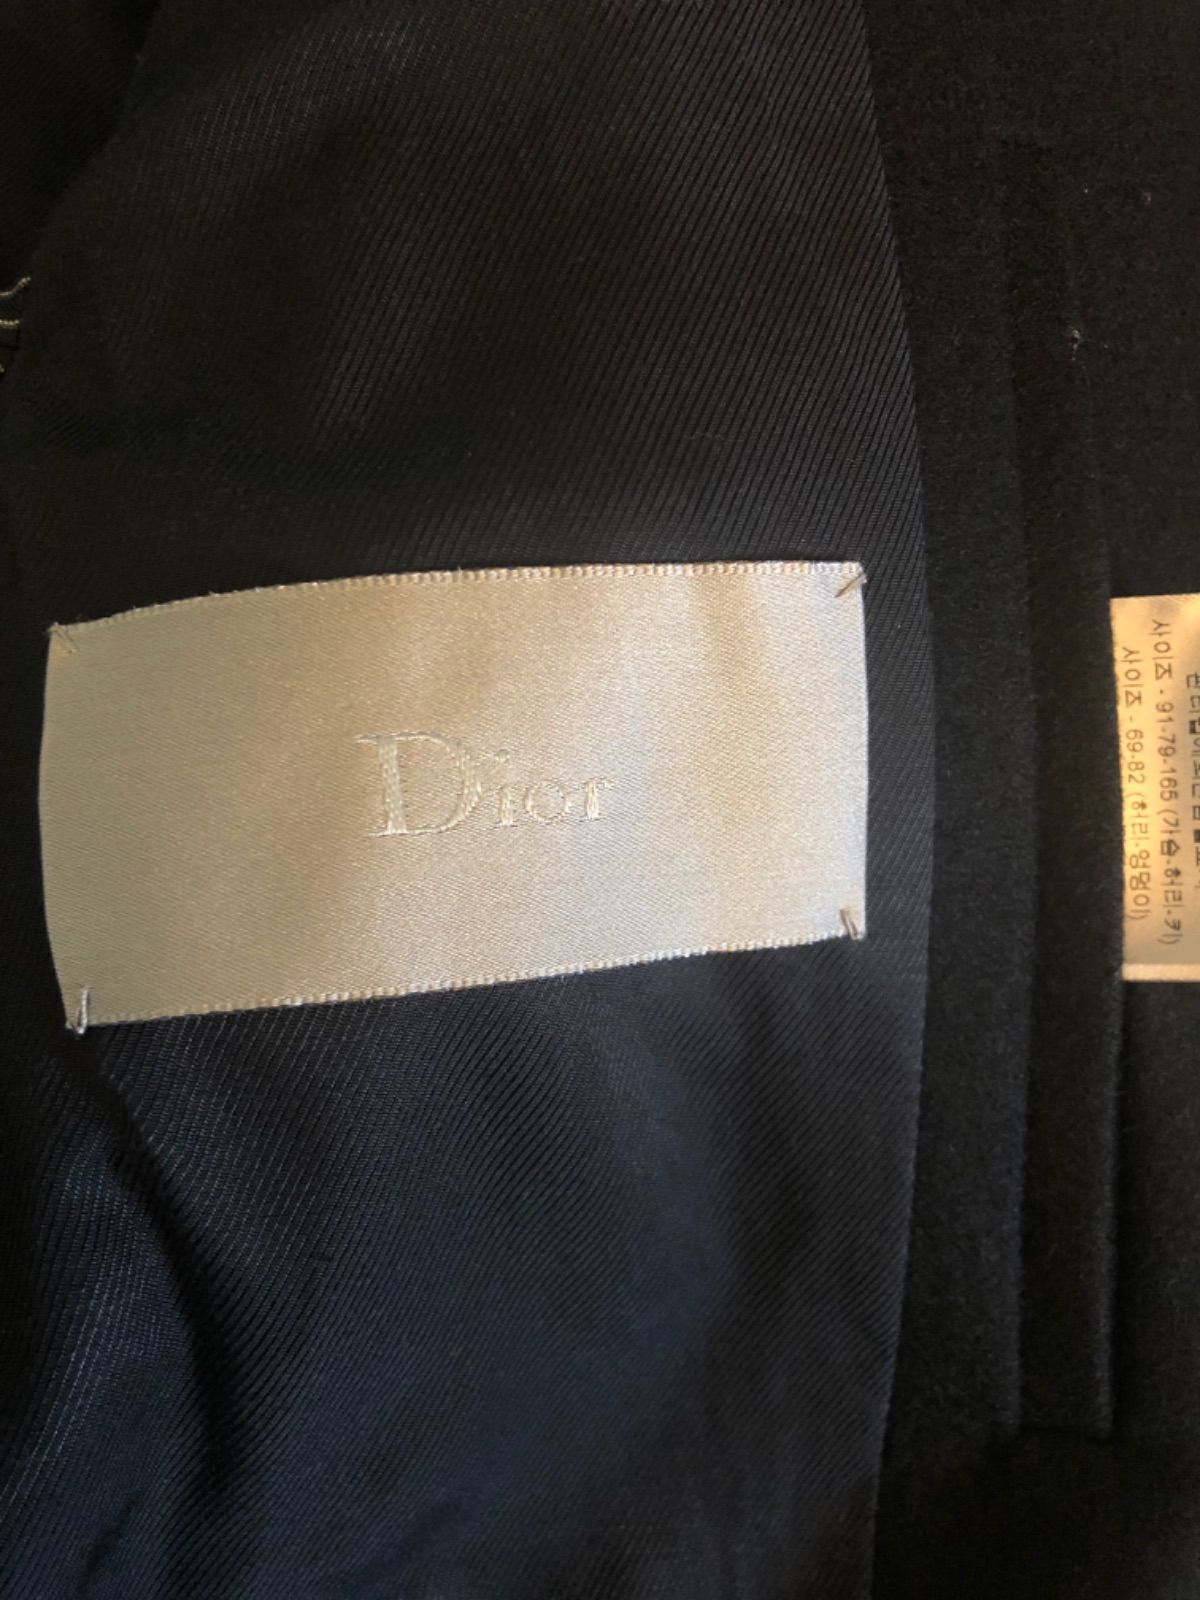 Dior HOMME 11AW Pコート 春秋